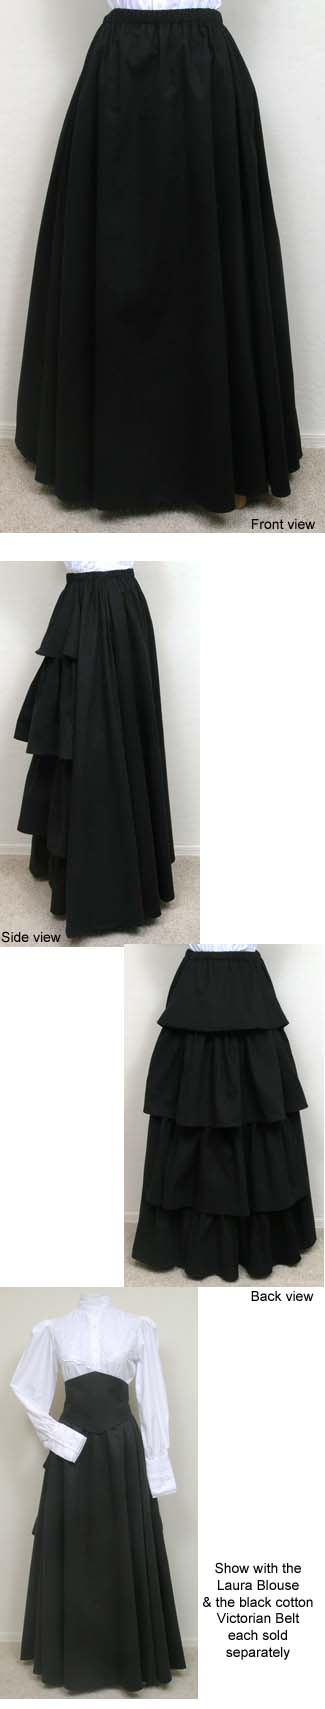 Frontier Classics Bustle Skirt - Black - Ladies' Old West Skirts and Dresses | Spur Western Wear